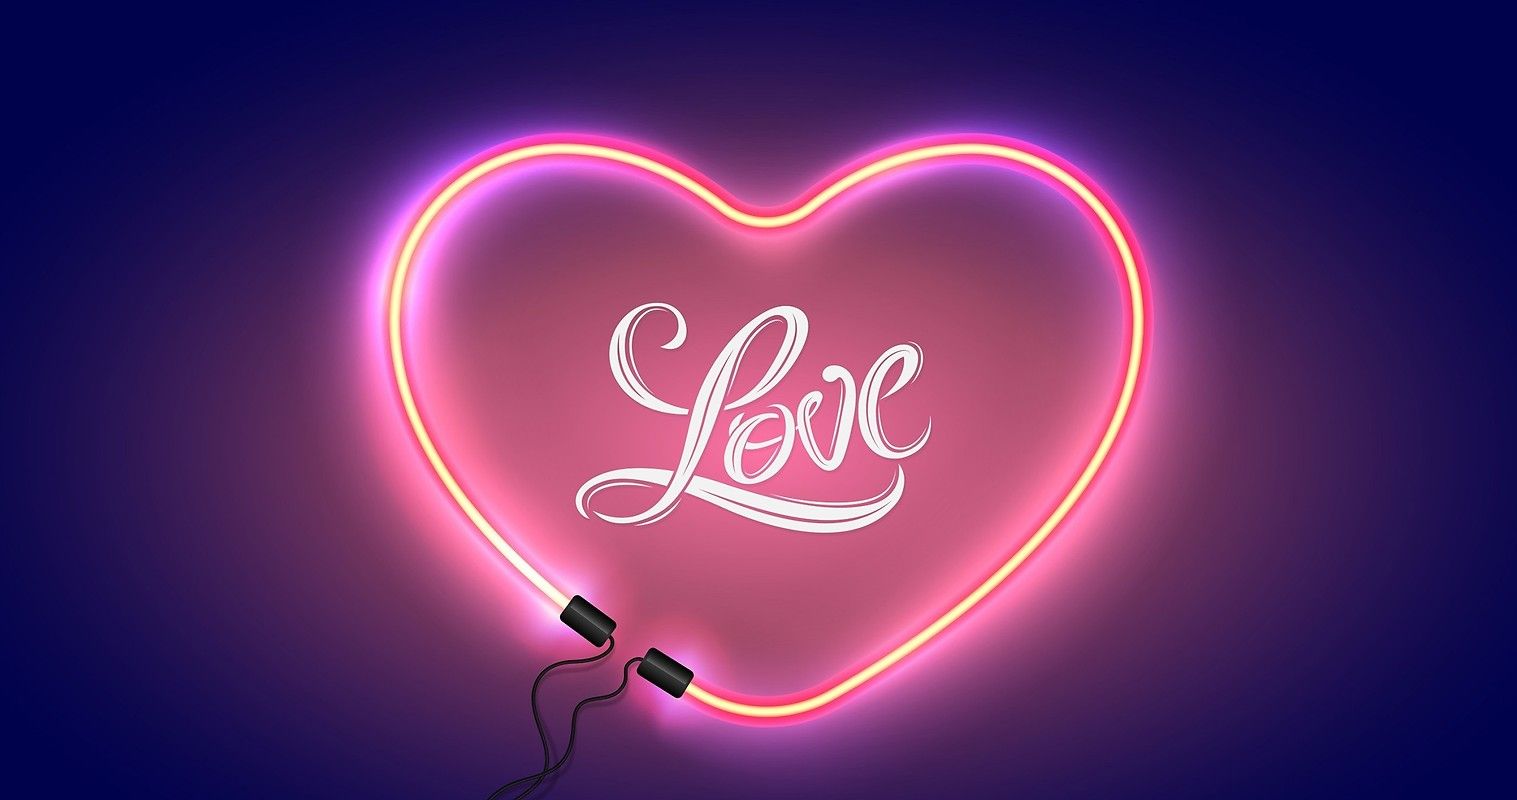 Love Heart Neon Sign Free Wallpaper download Free Love Heart Neon Sign HD Wallpaper to your mobile phone or tablet